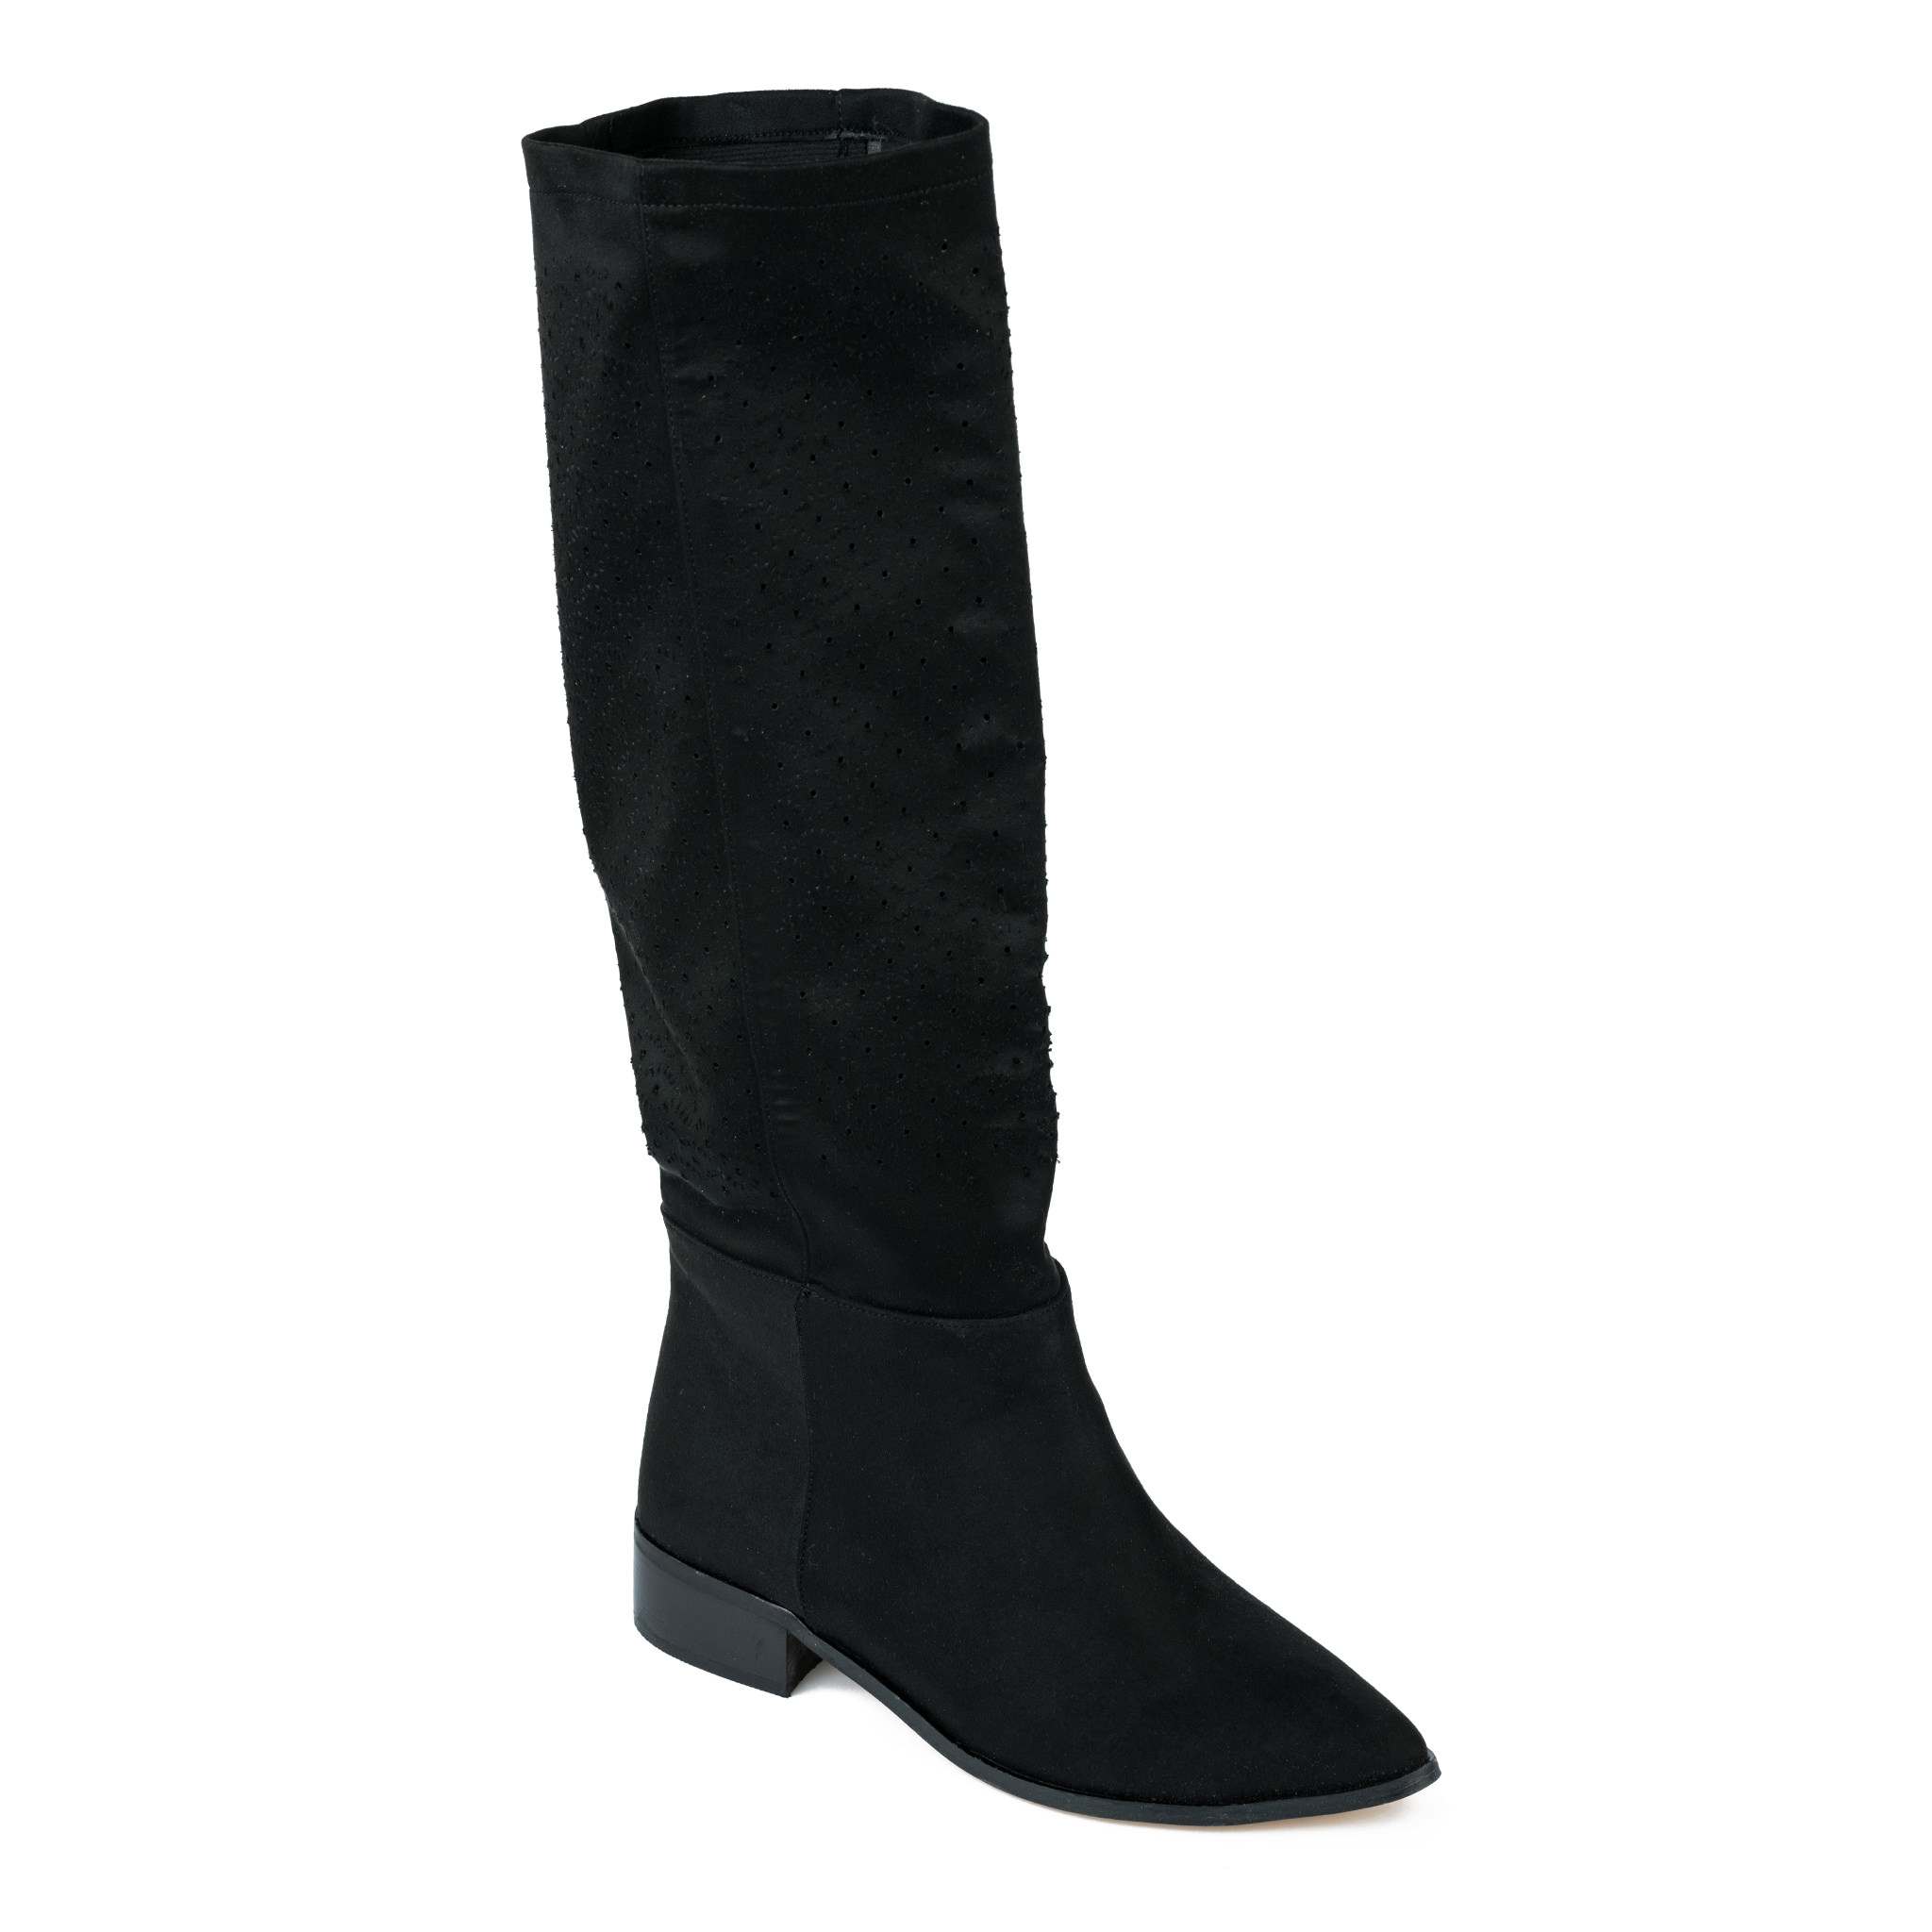 VELOUR HOLLOW PULL ON BOOTS - BLACK